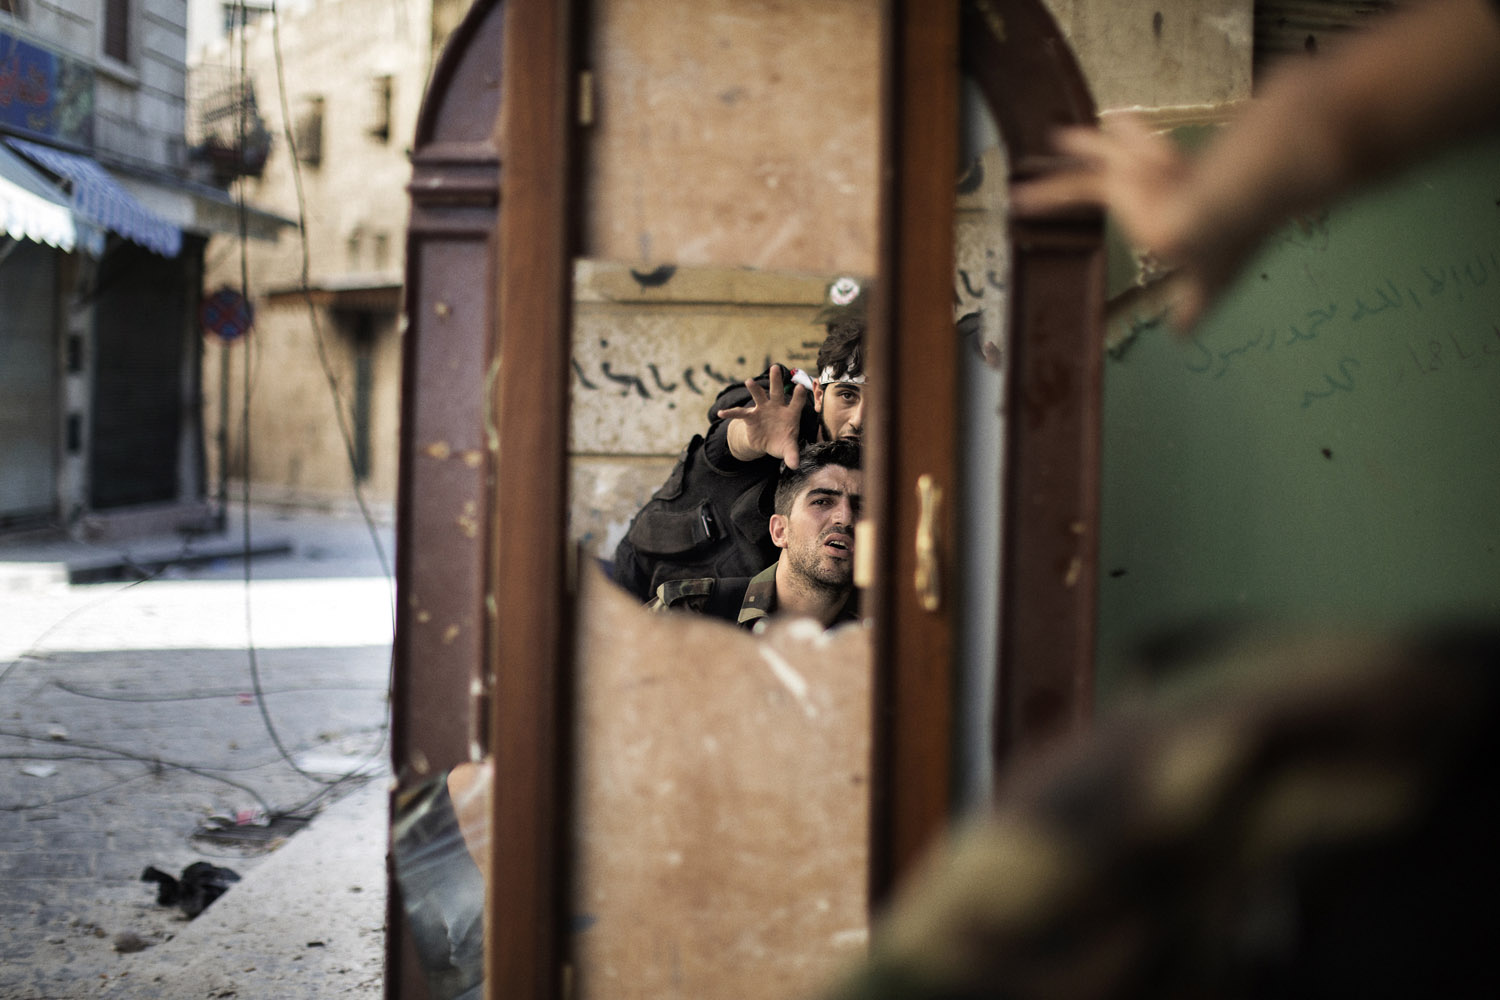 Sept. 16, 2012. Free Syria Army fighters are reflected in a mirror they use to see a Syrian Army post only 50 meters away as they man a position in the Old City of Aleppo, Syria.